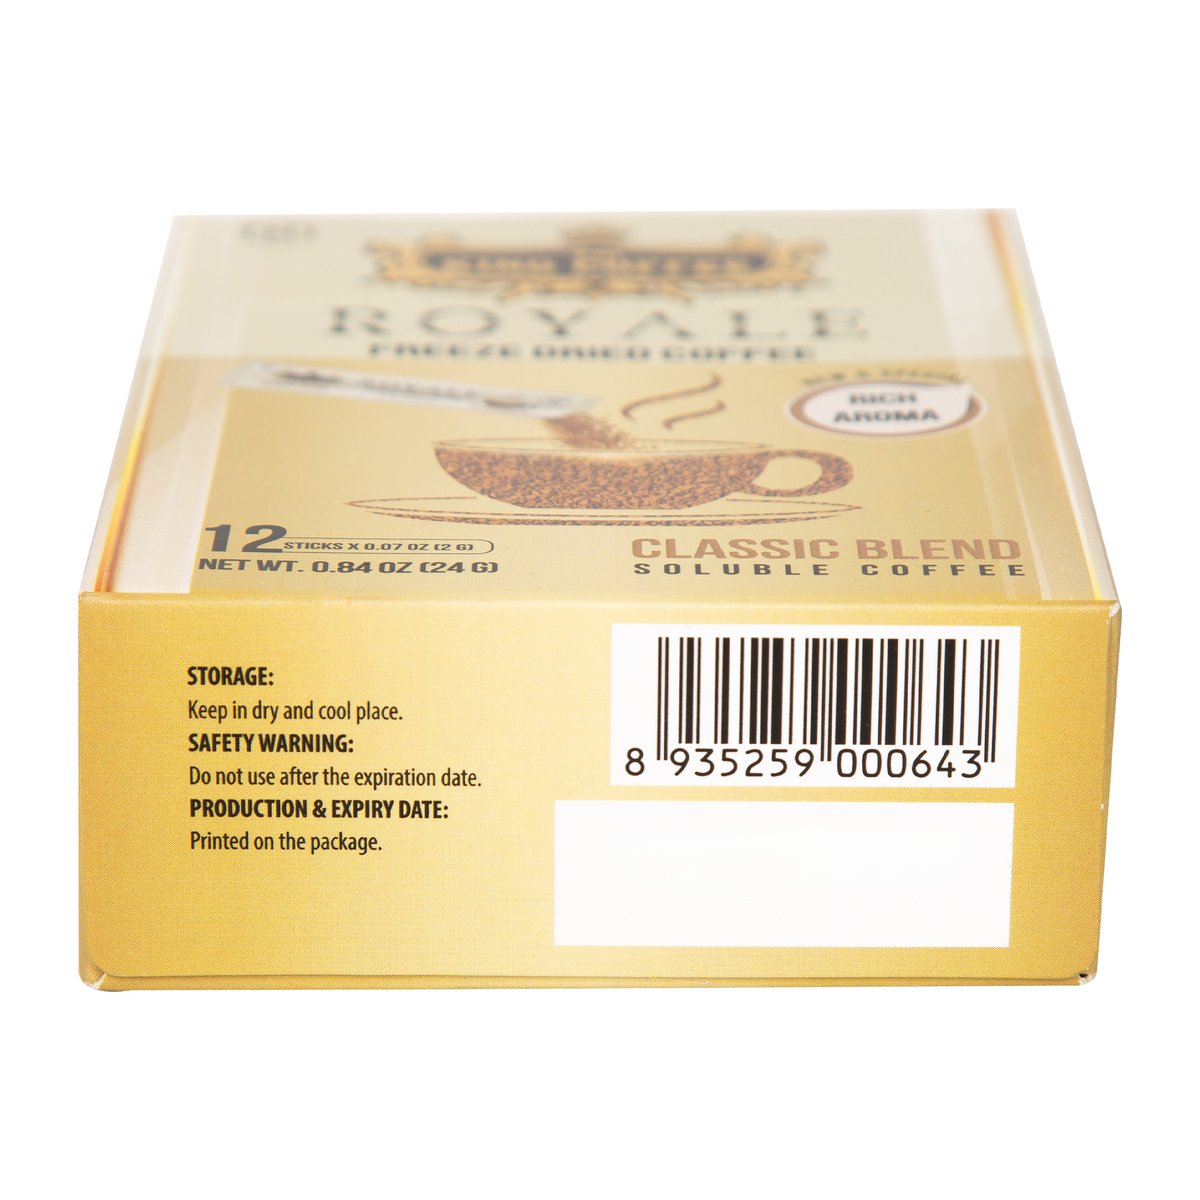 King Coffee Royale Classic Blend Soluble Coffee 12 x 2 g